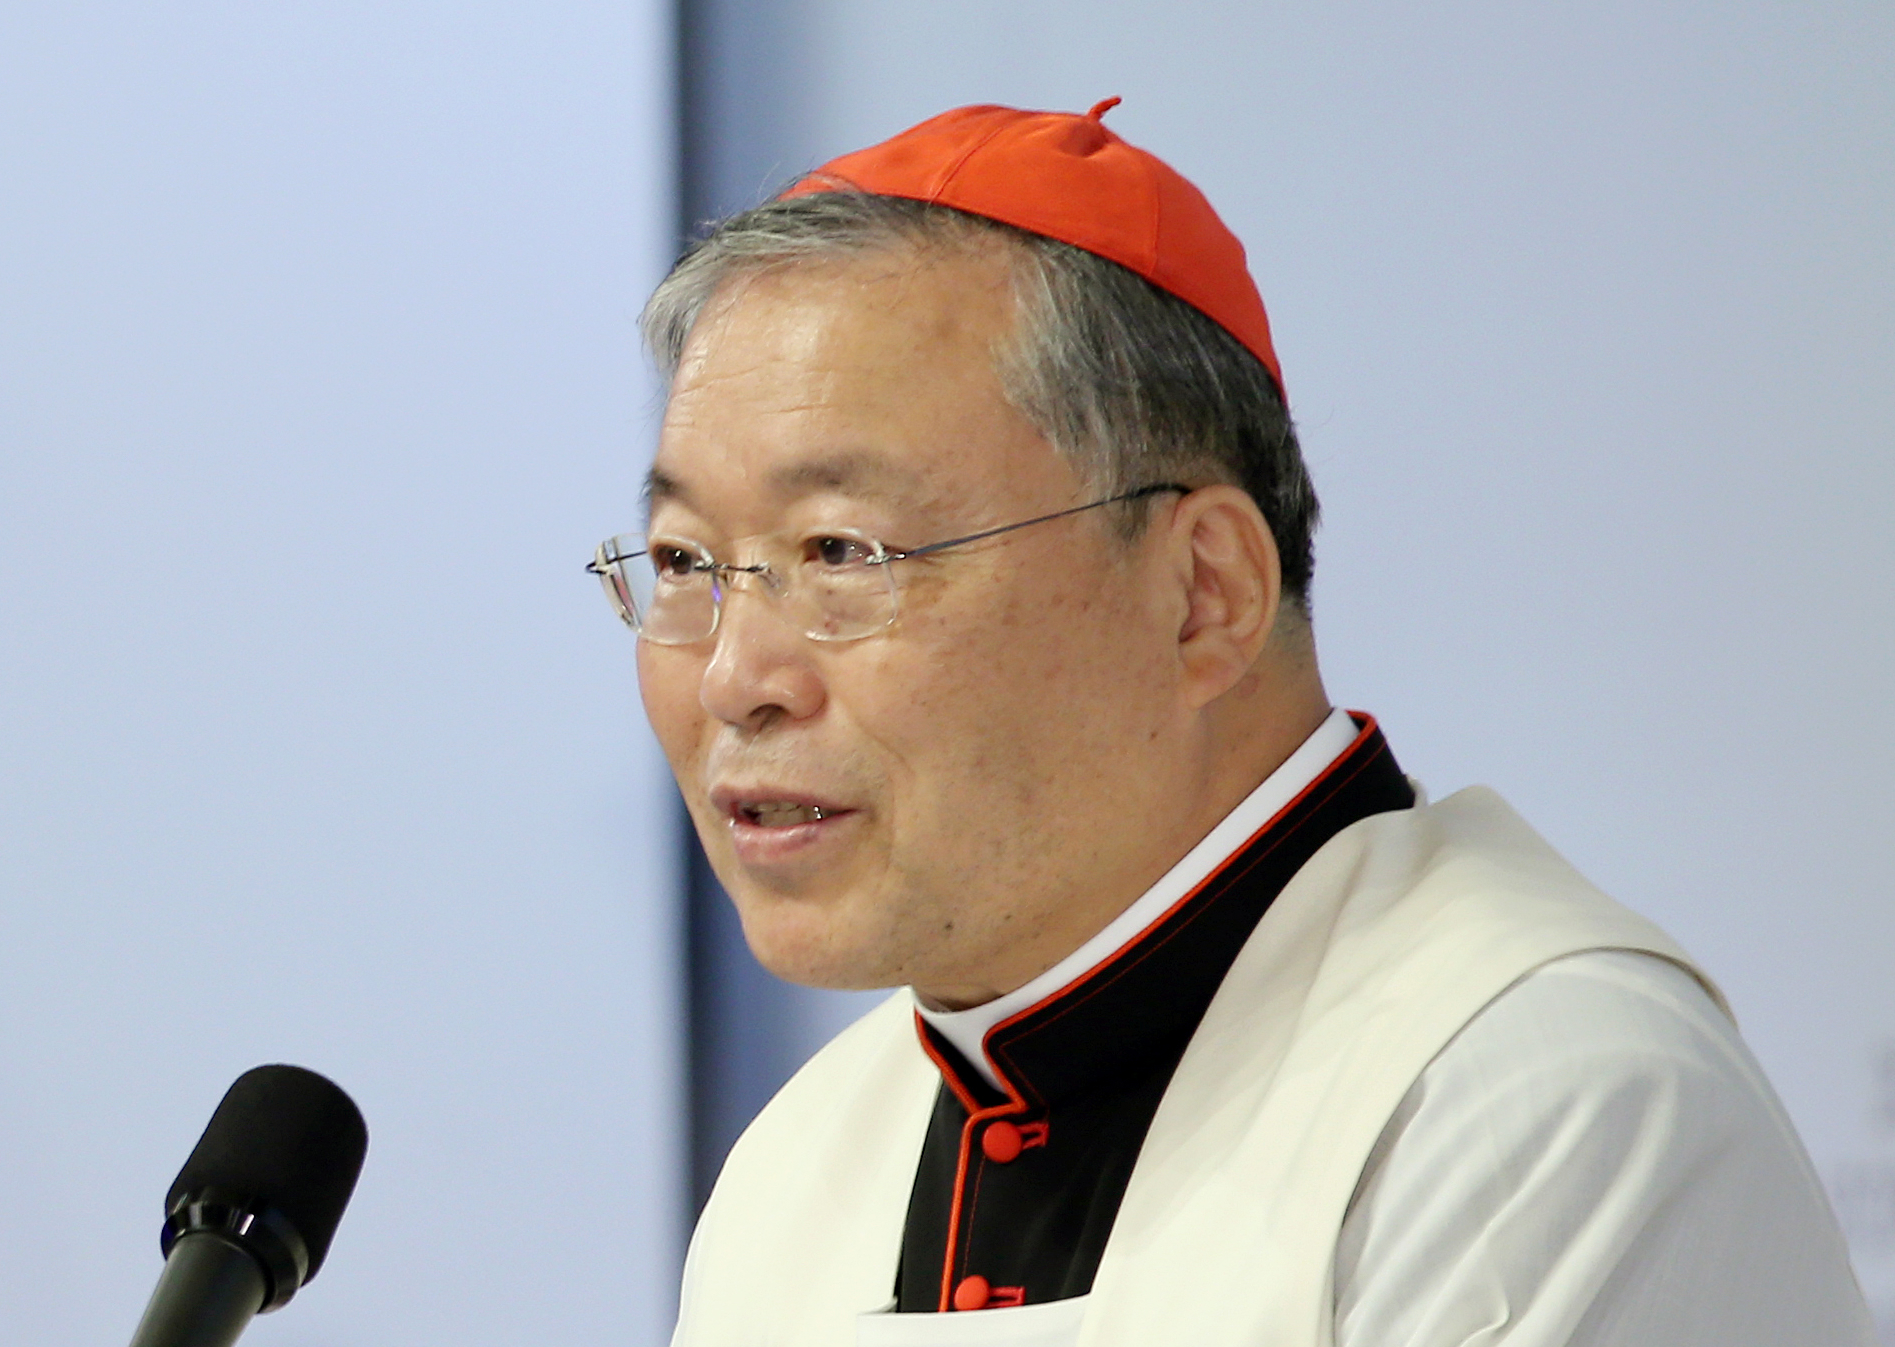 Archbishop of Seoul and Cardinal of Korea Andrew Yeom Soo-jung (Photo: August 13